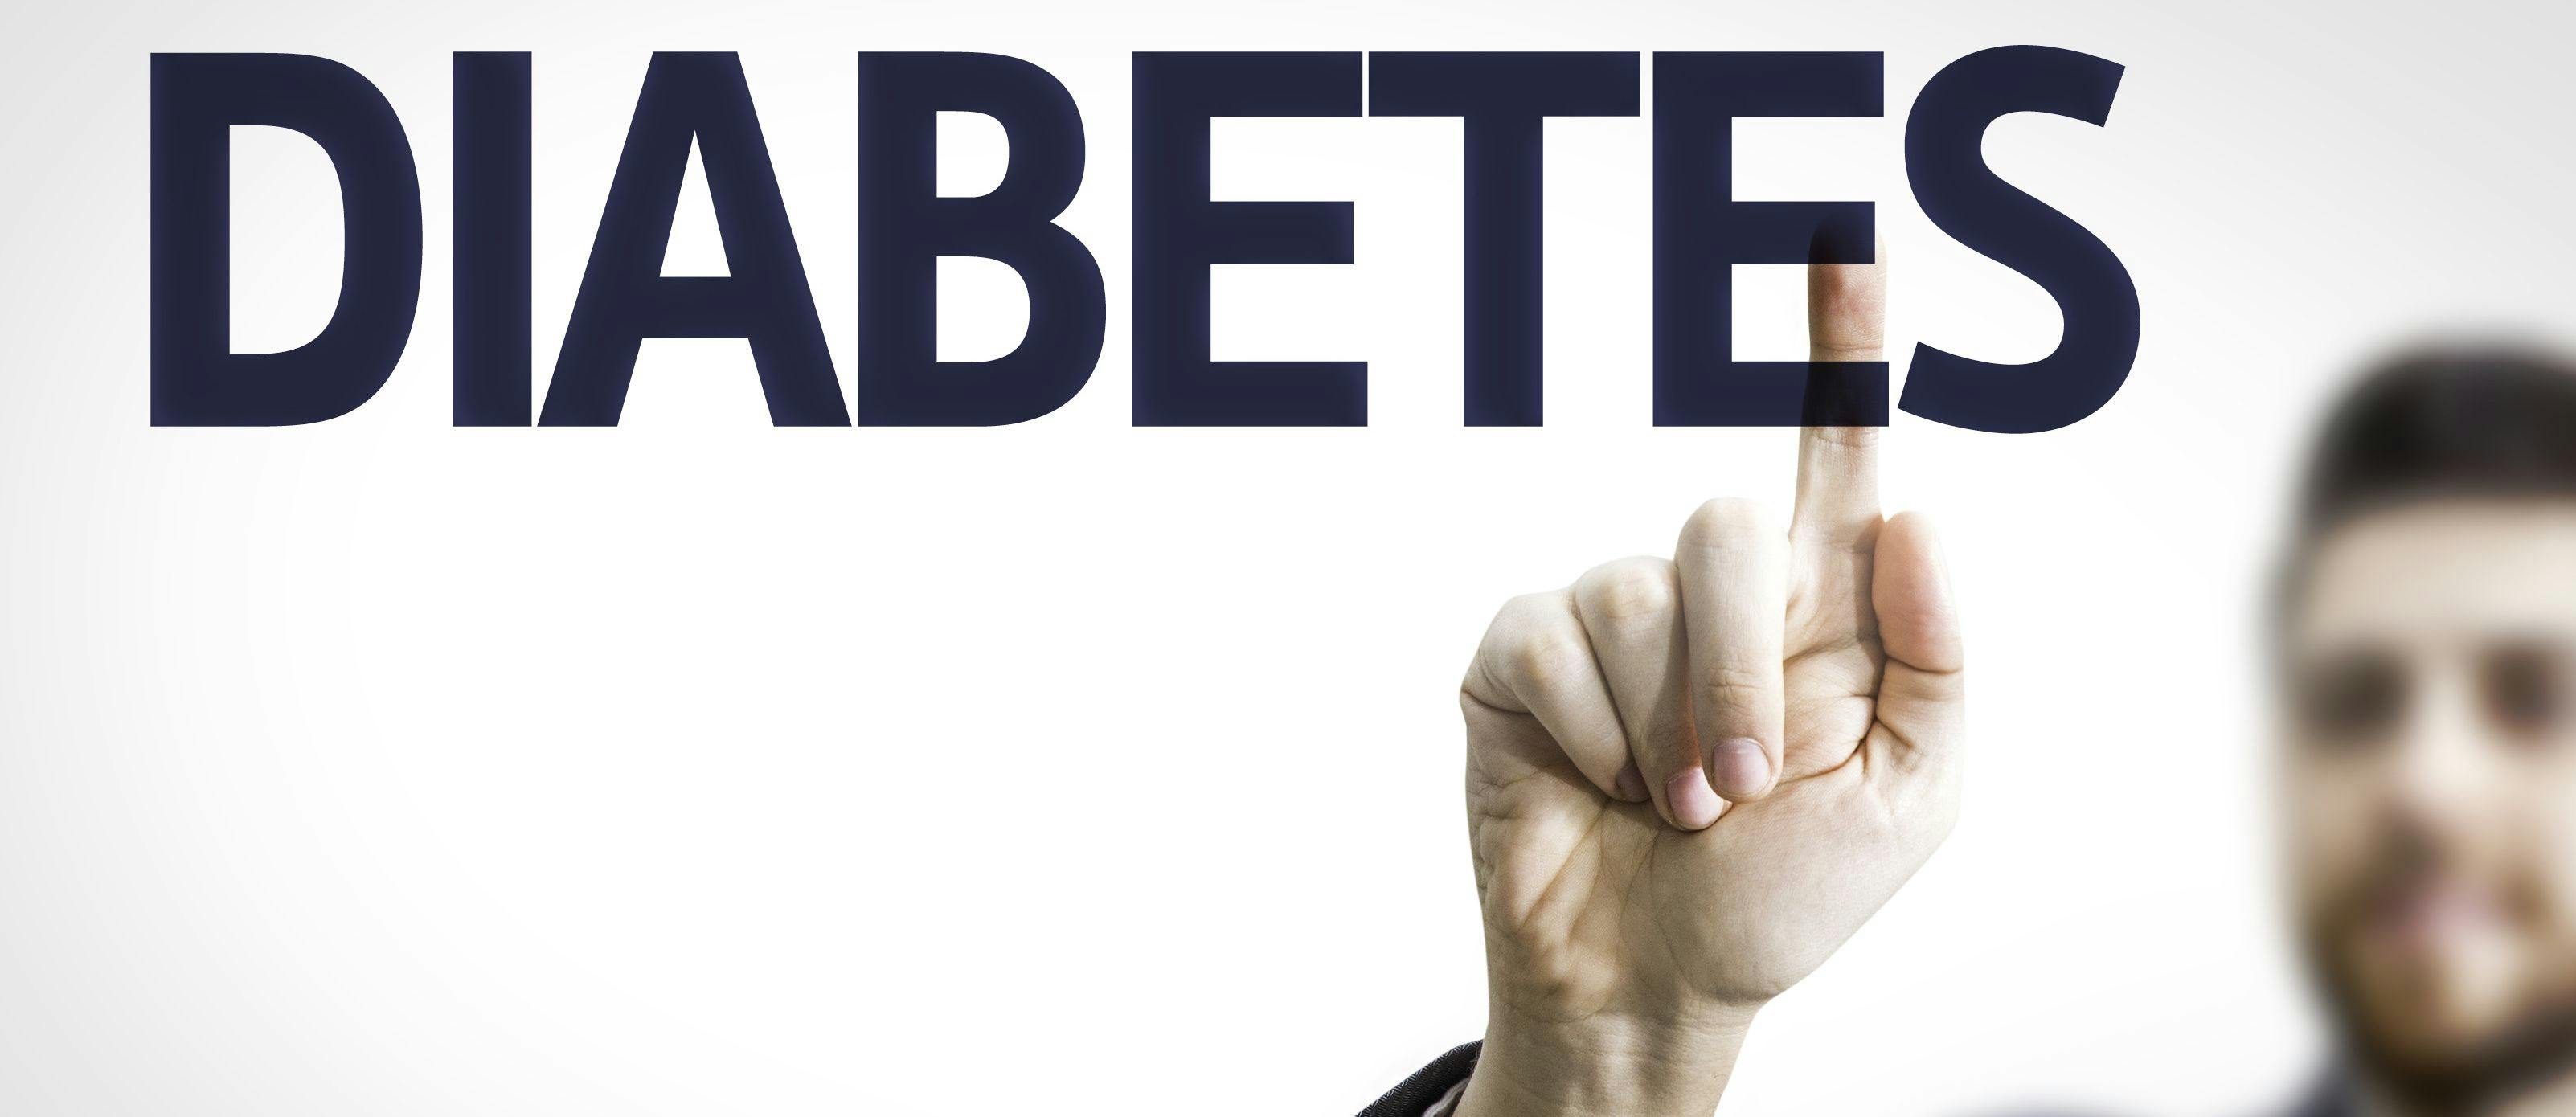 Personalized Health Coaching May Prevent Progression to Type 2 Diabetes